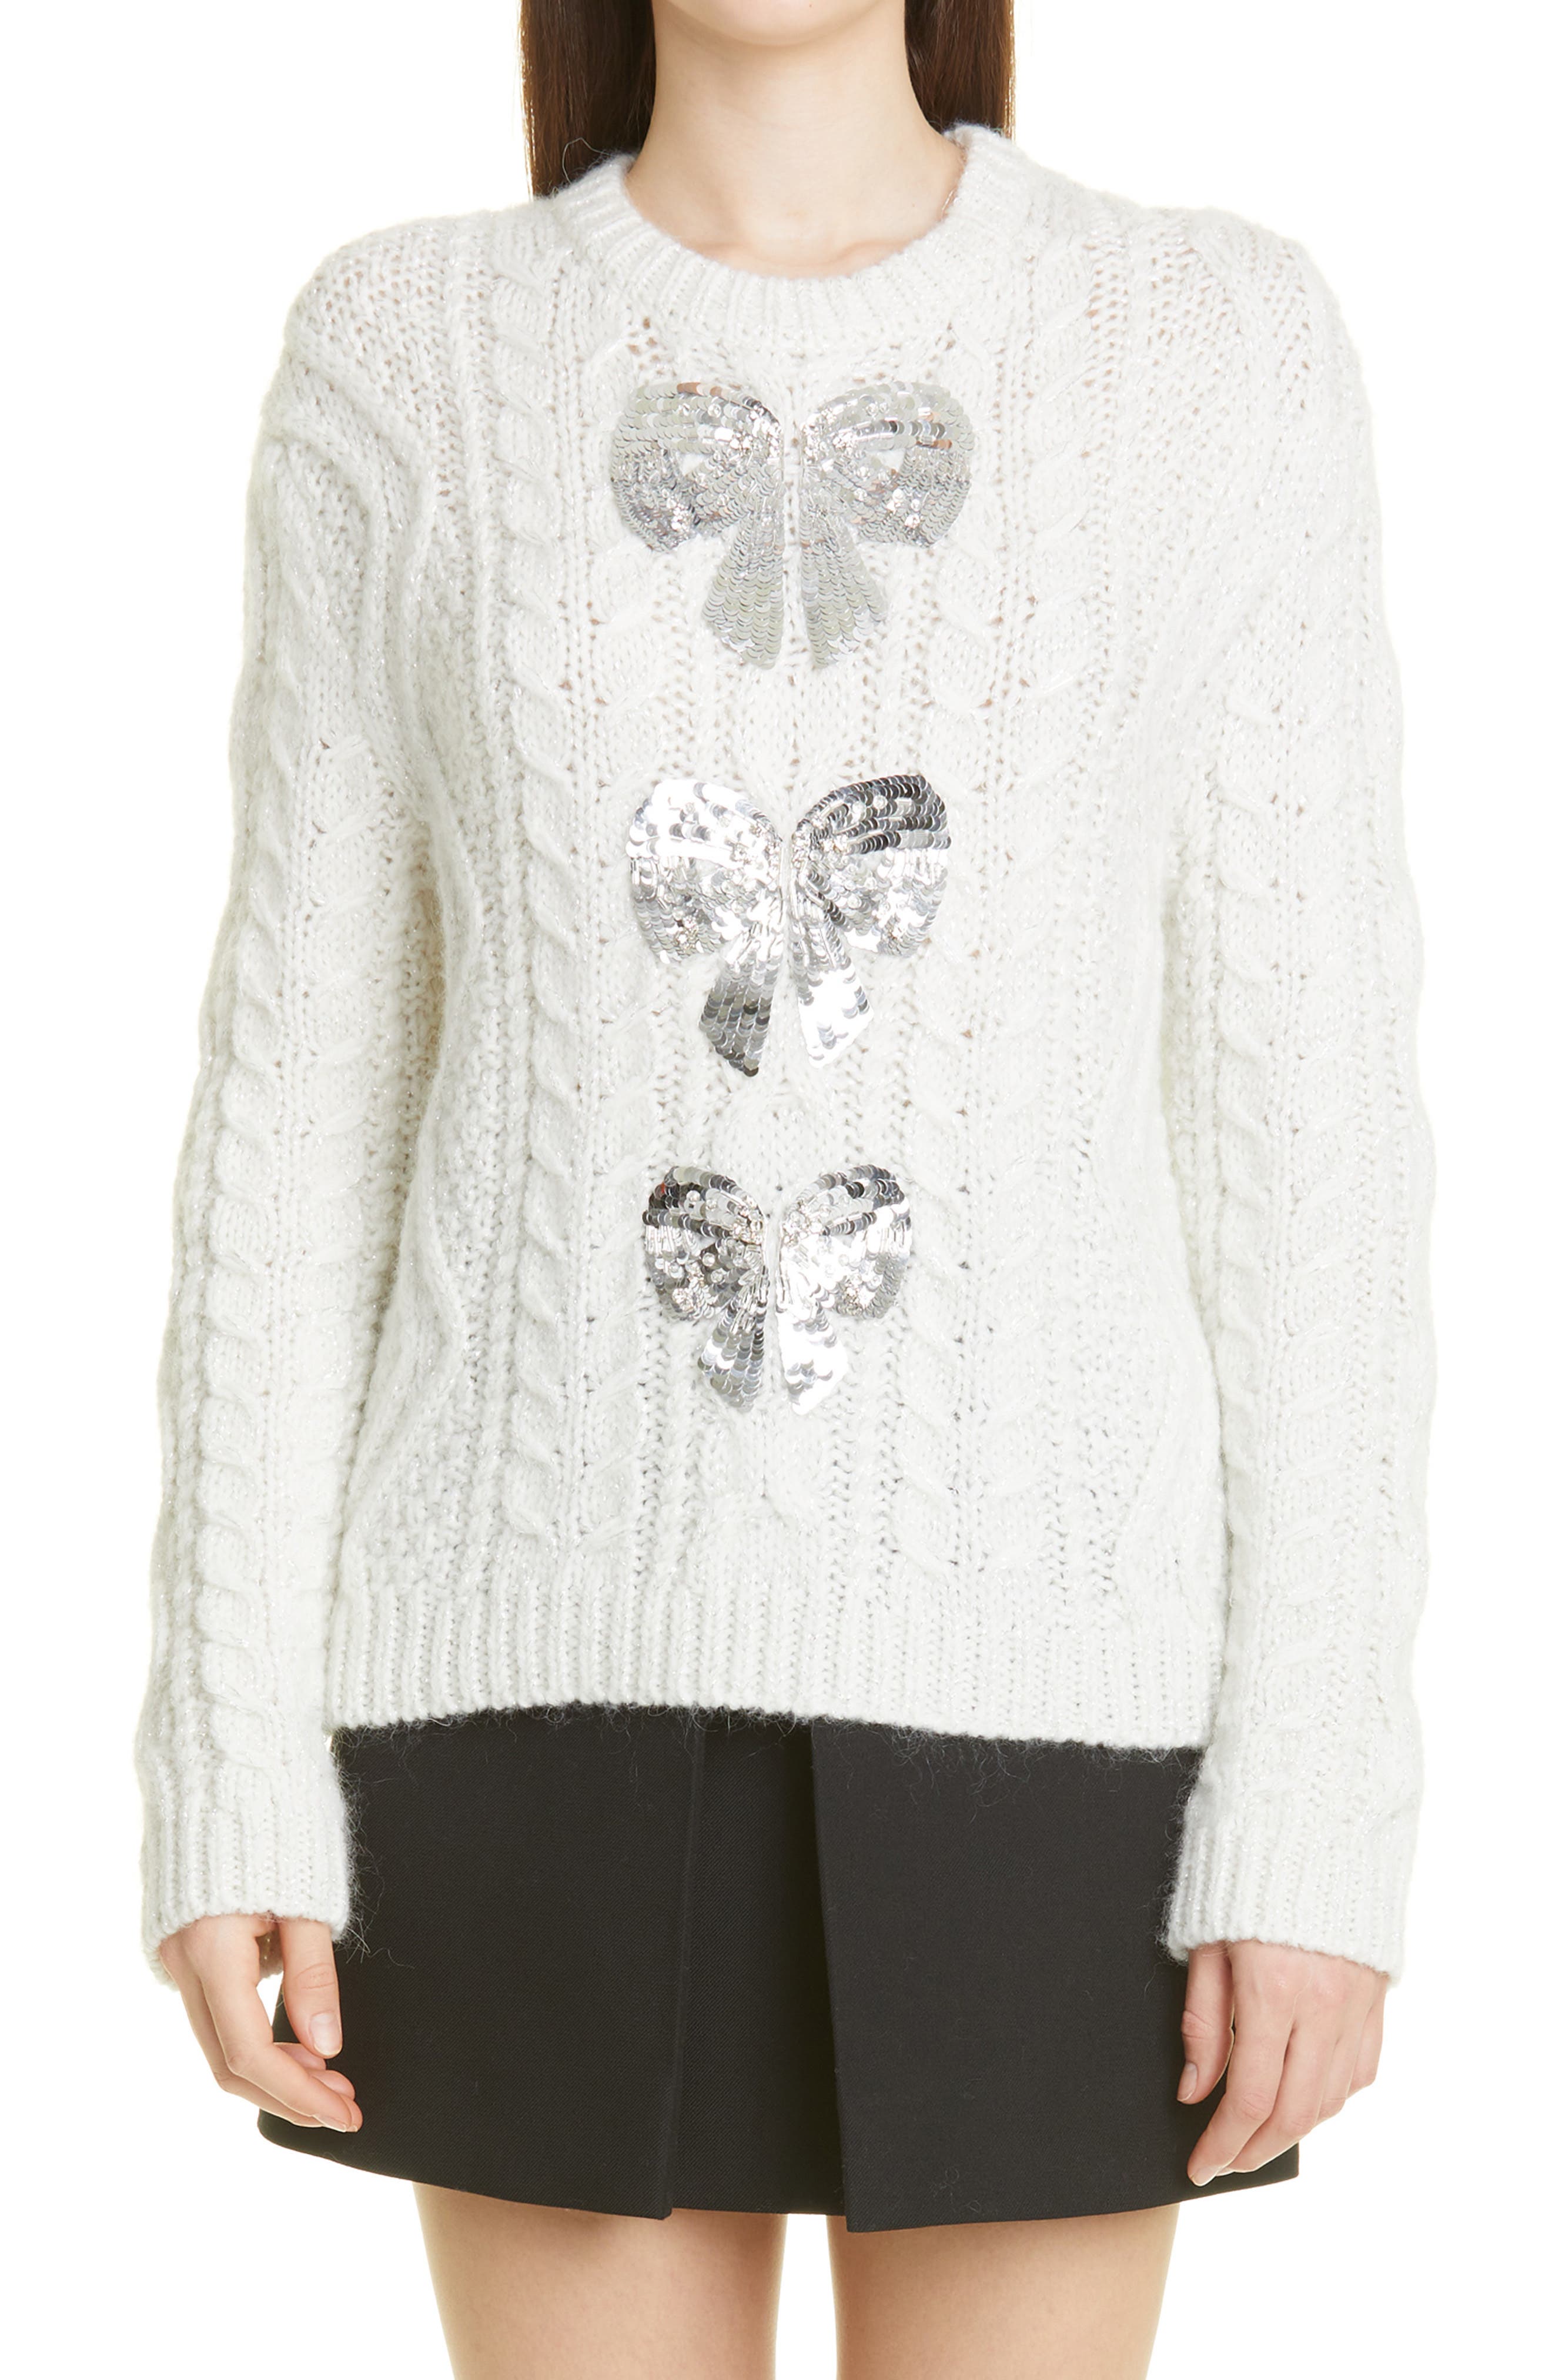 Valentino Sequin Bow Cable Knit Sweater in Bianco Silver Cz7 at Nordstrom, Size Large